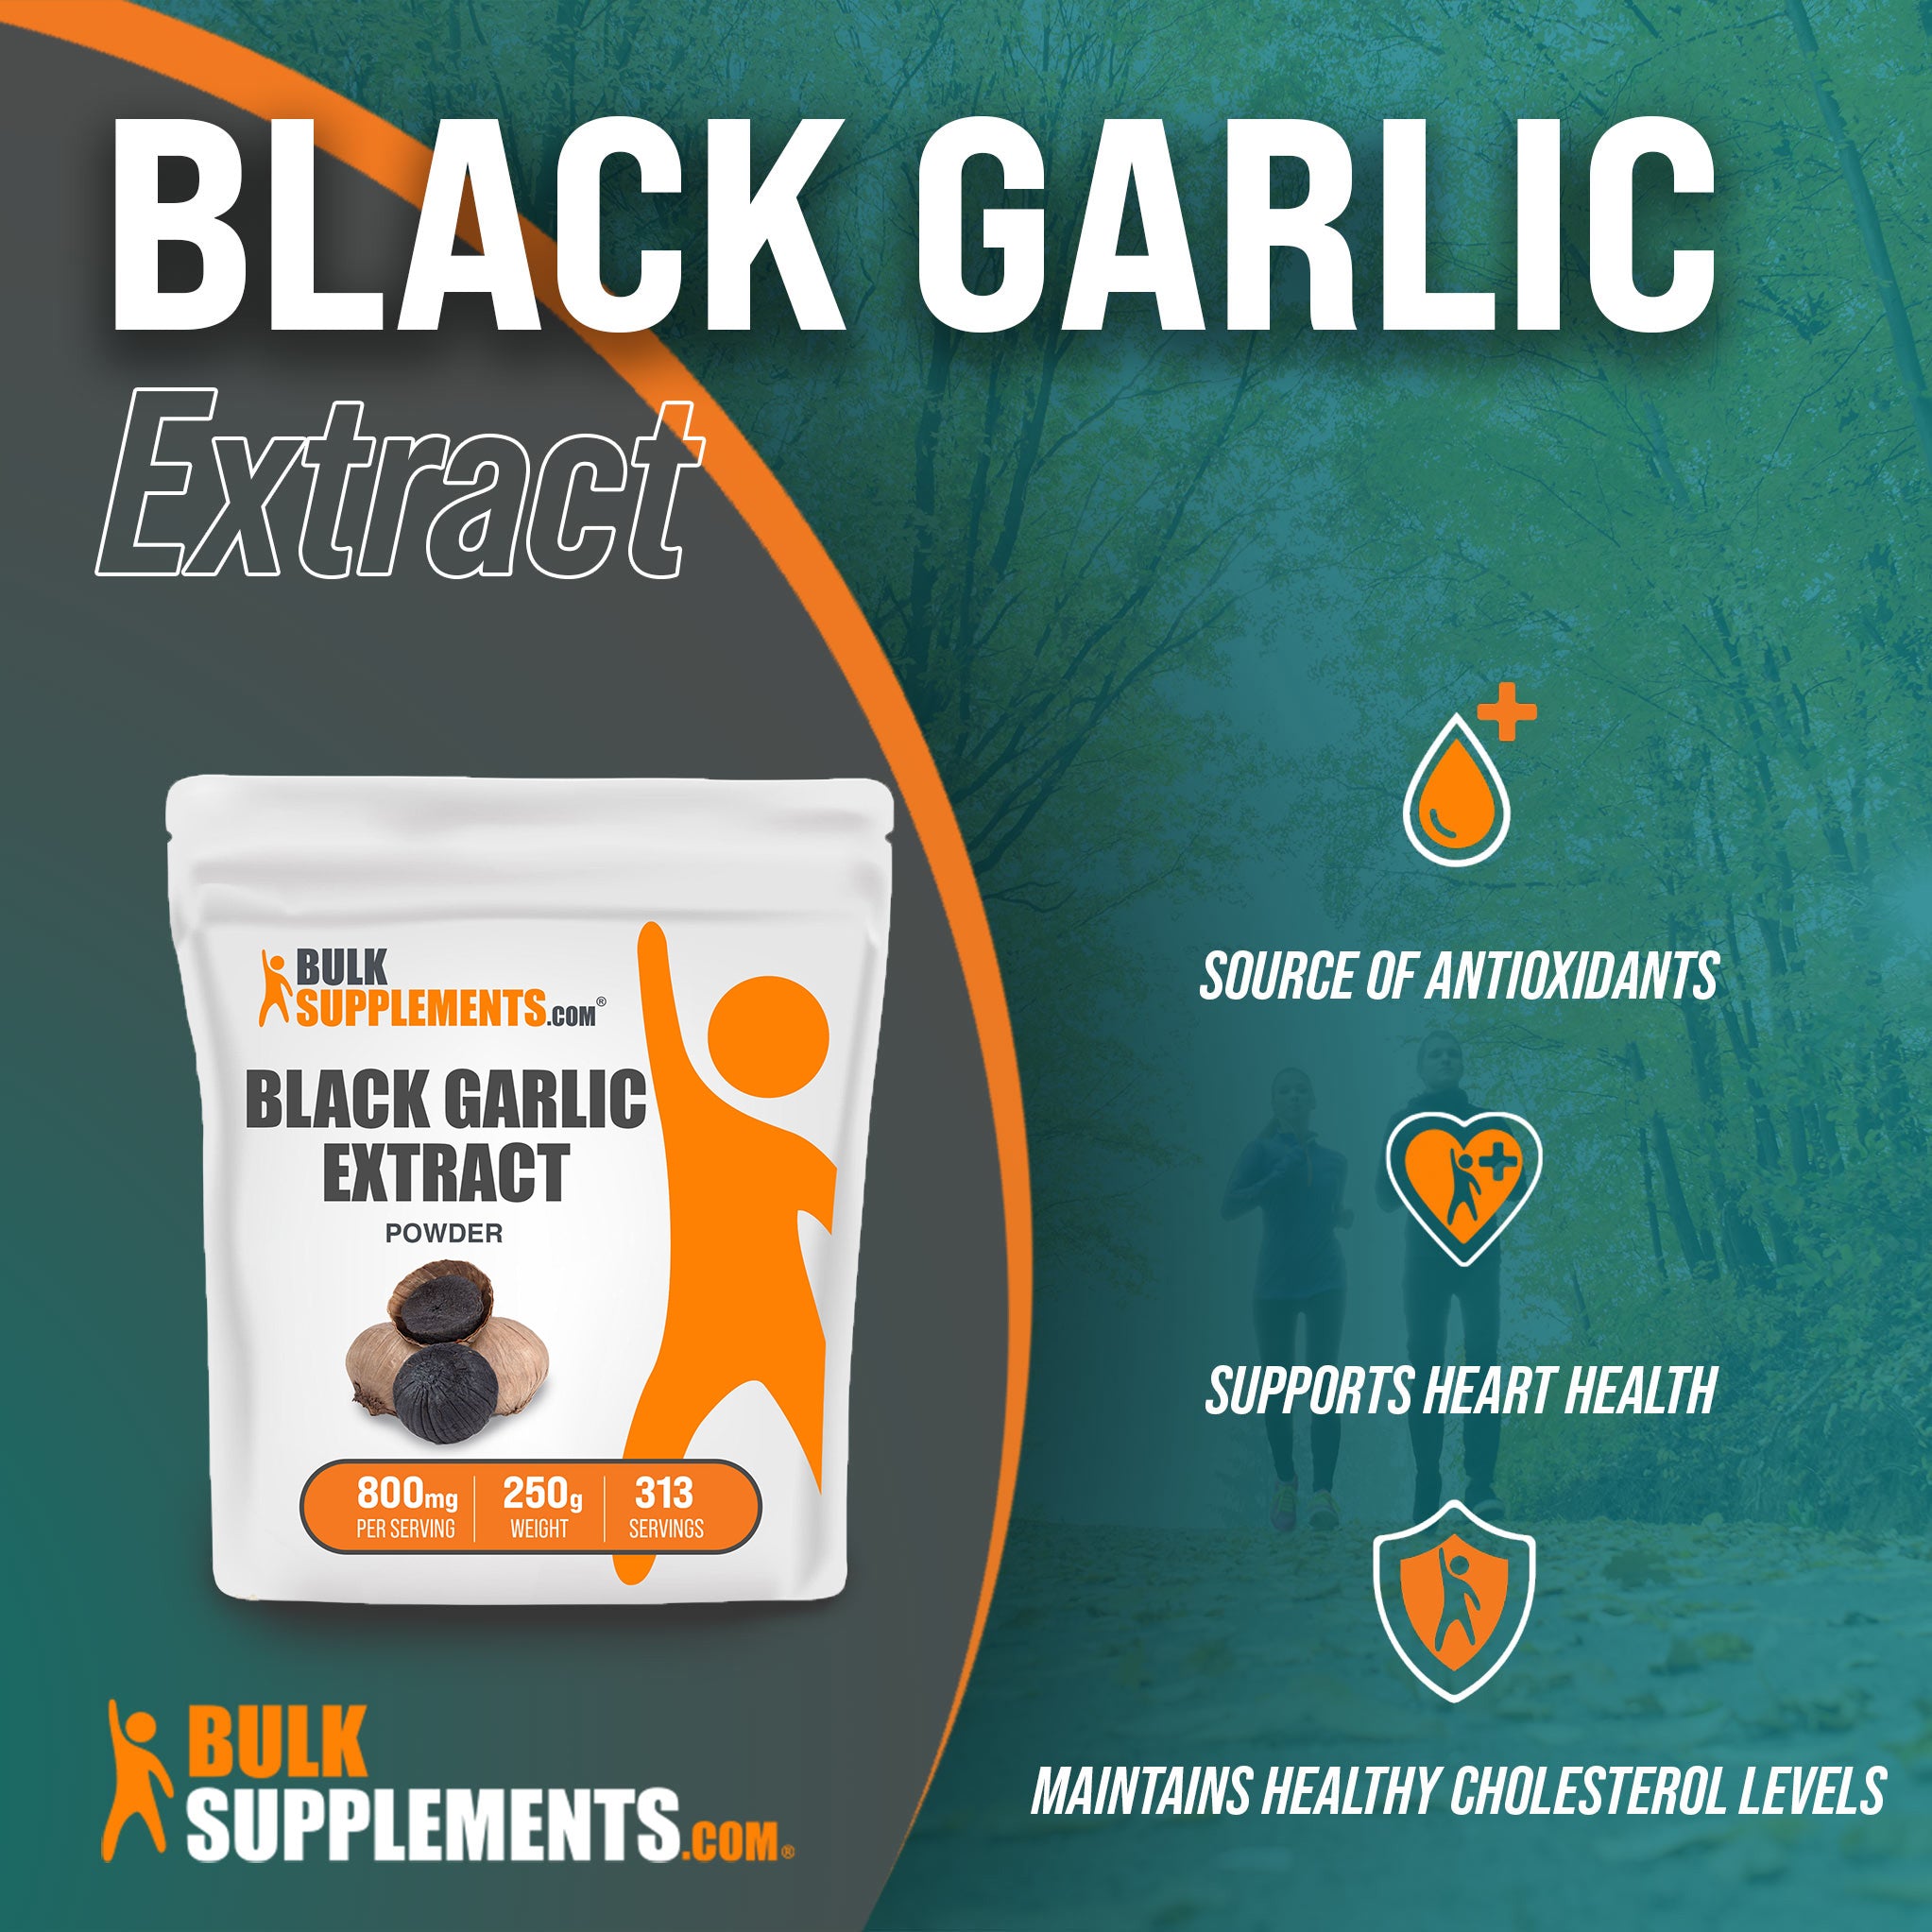 250g bags of Black Garlic Extract are ideal antioxidants supplements